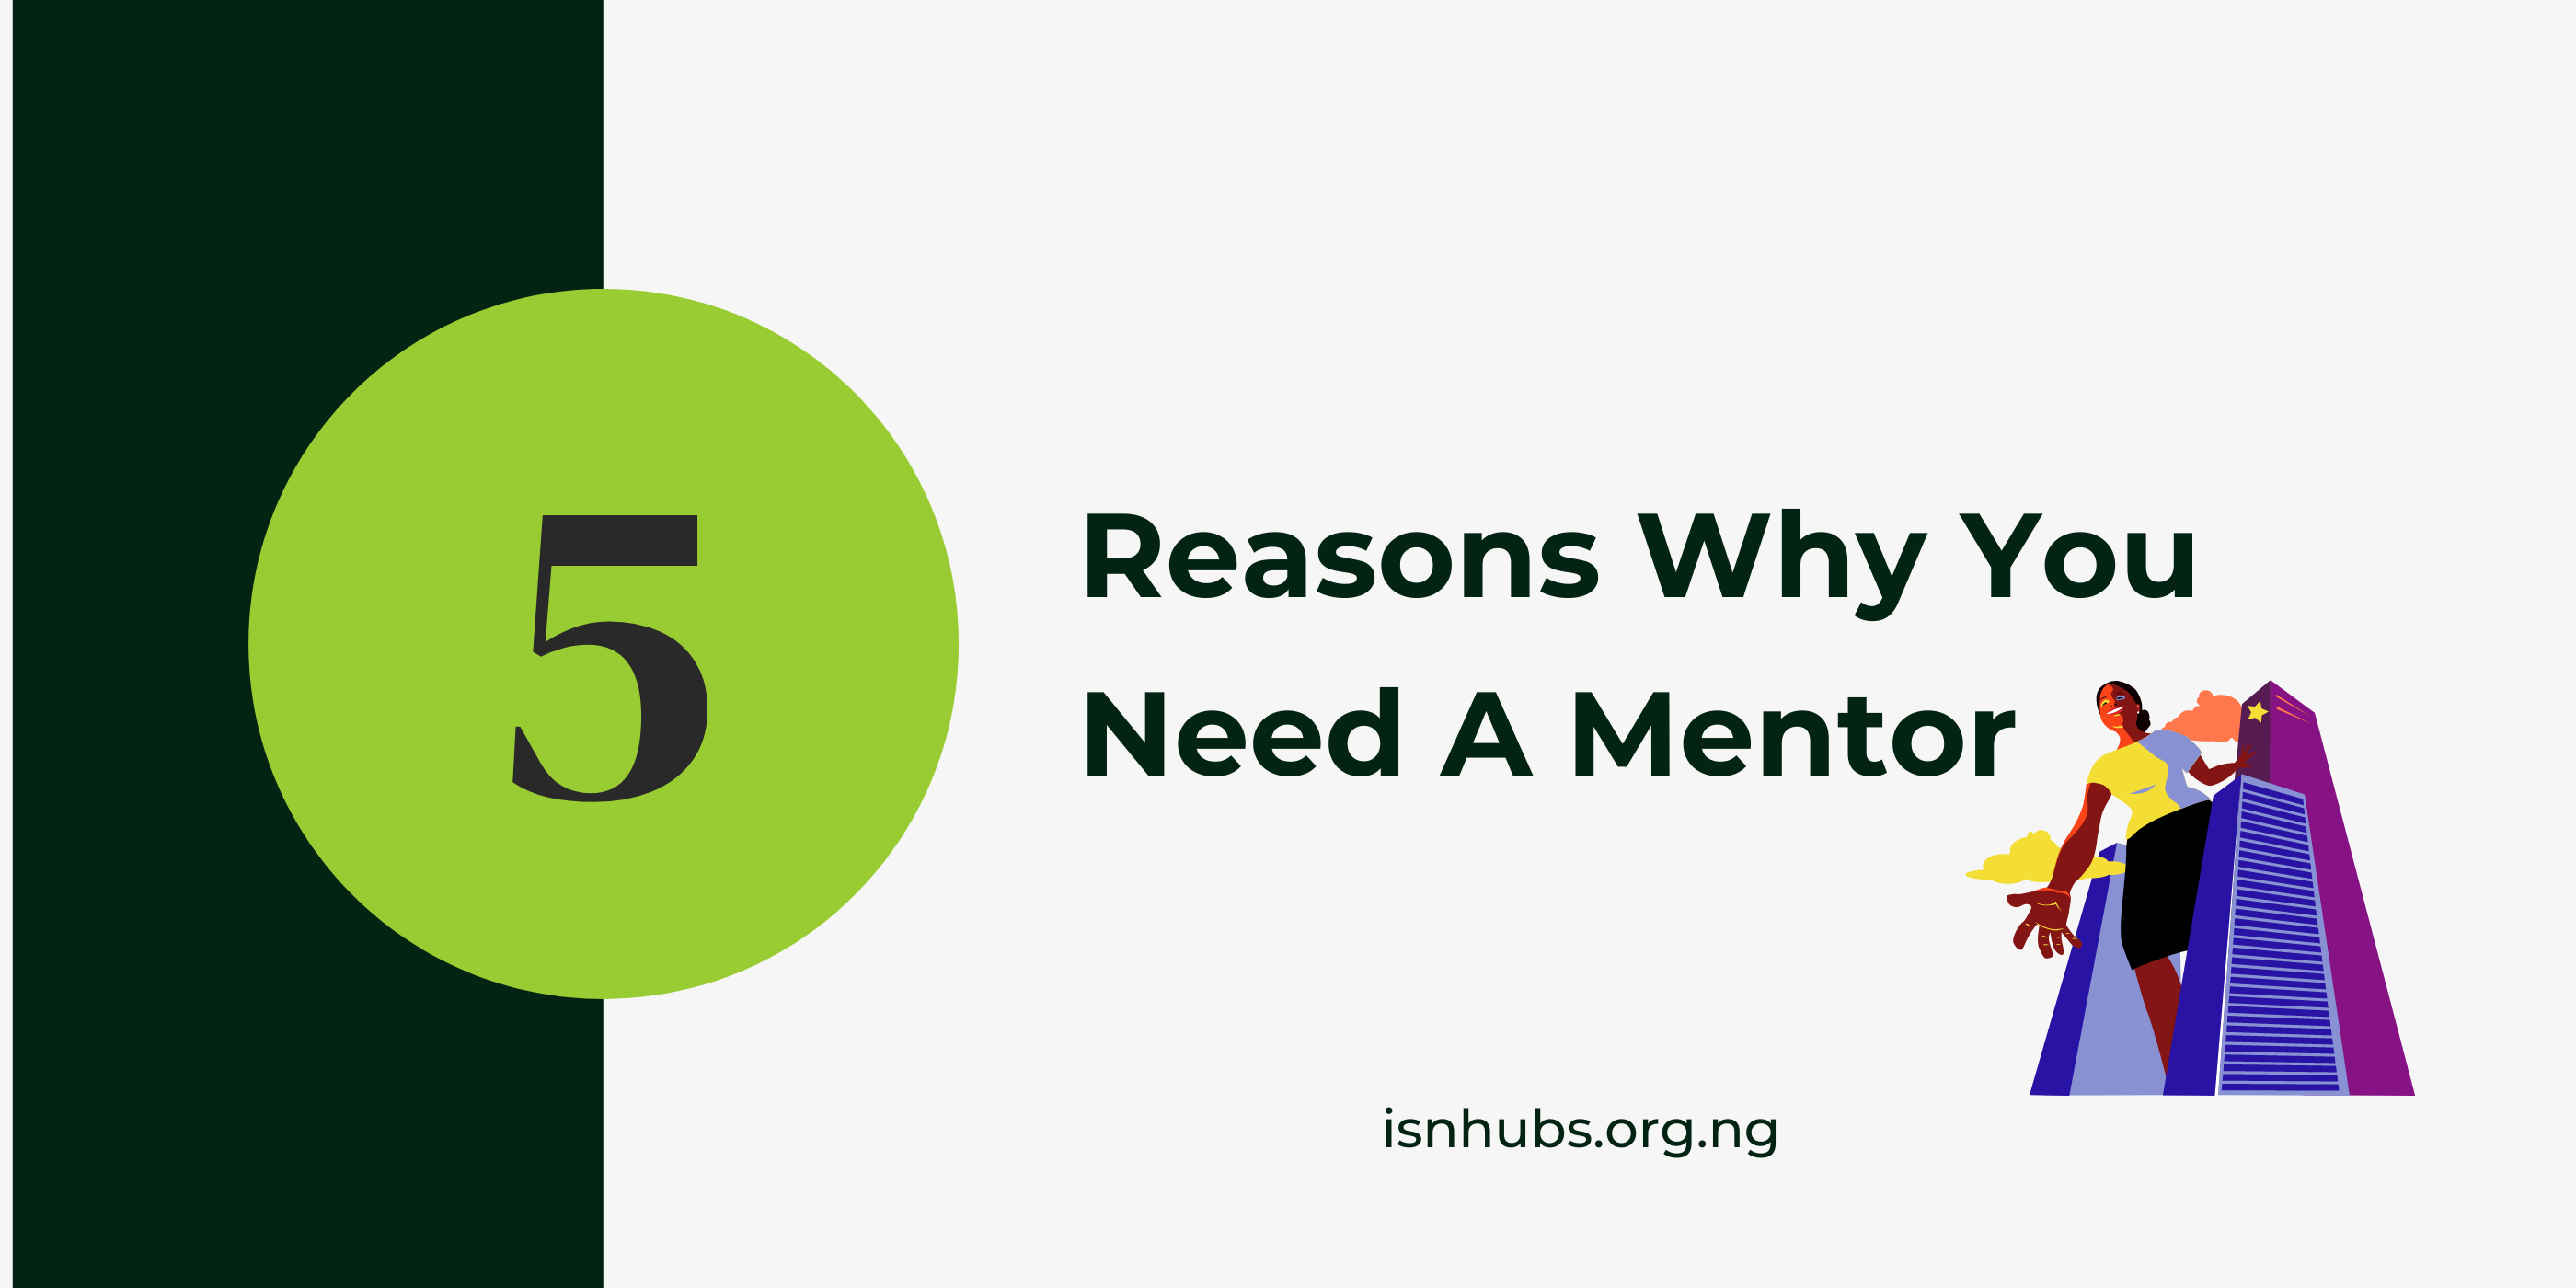 5 Reasons Why You Need A Mentor